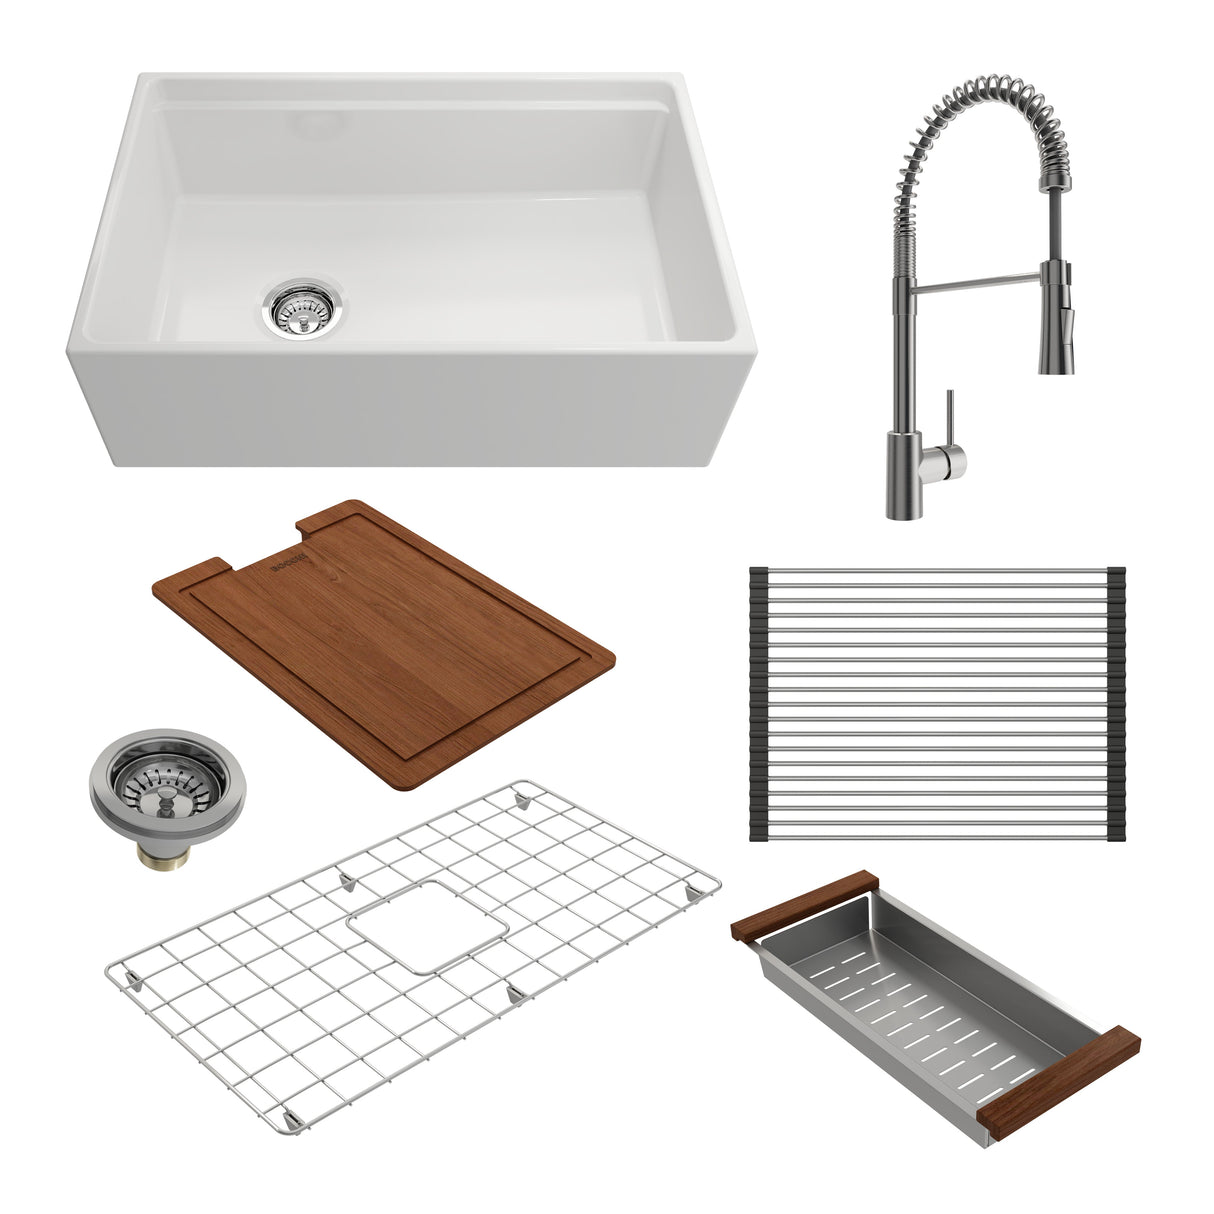 BOCCHI 1344-001-2020SS Kit: 1344 Contempo Step-Rim Apron Front Fireclay 30 in. Single Bowl Kitchen Sink with Integrated Work Station & Accessories w/ Livenza 2.0 Faucet